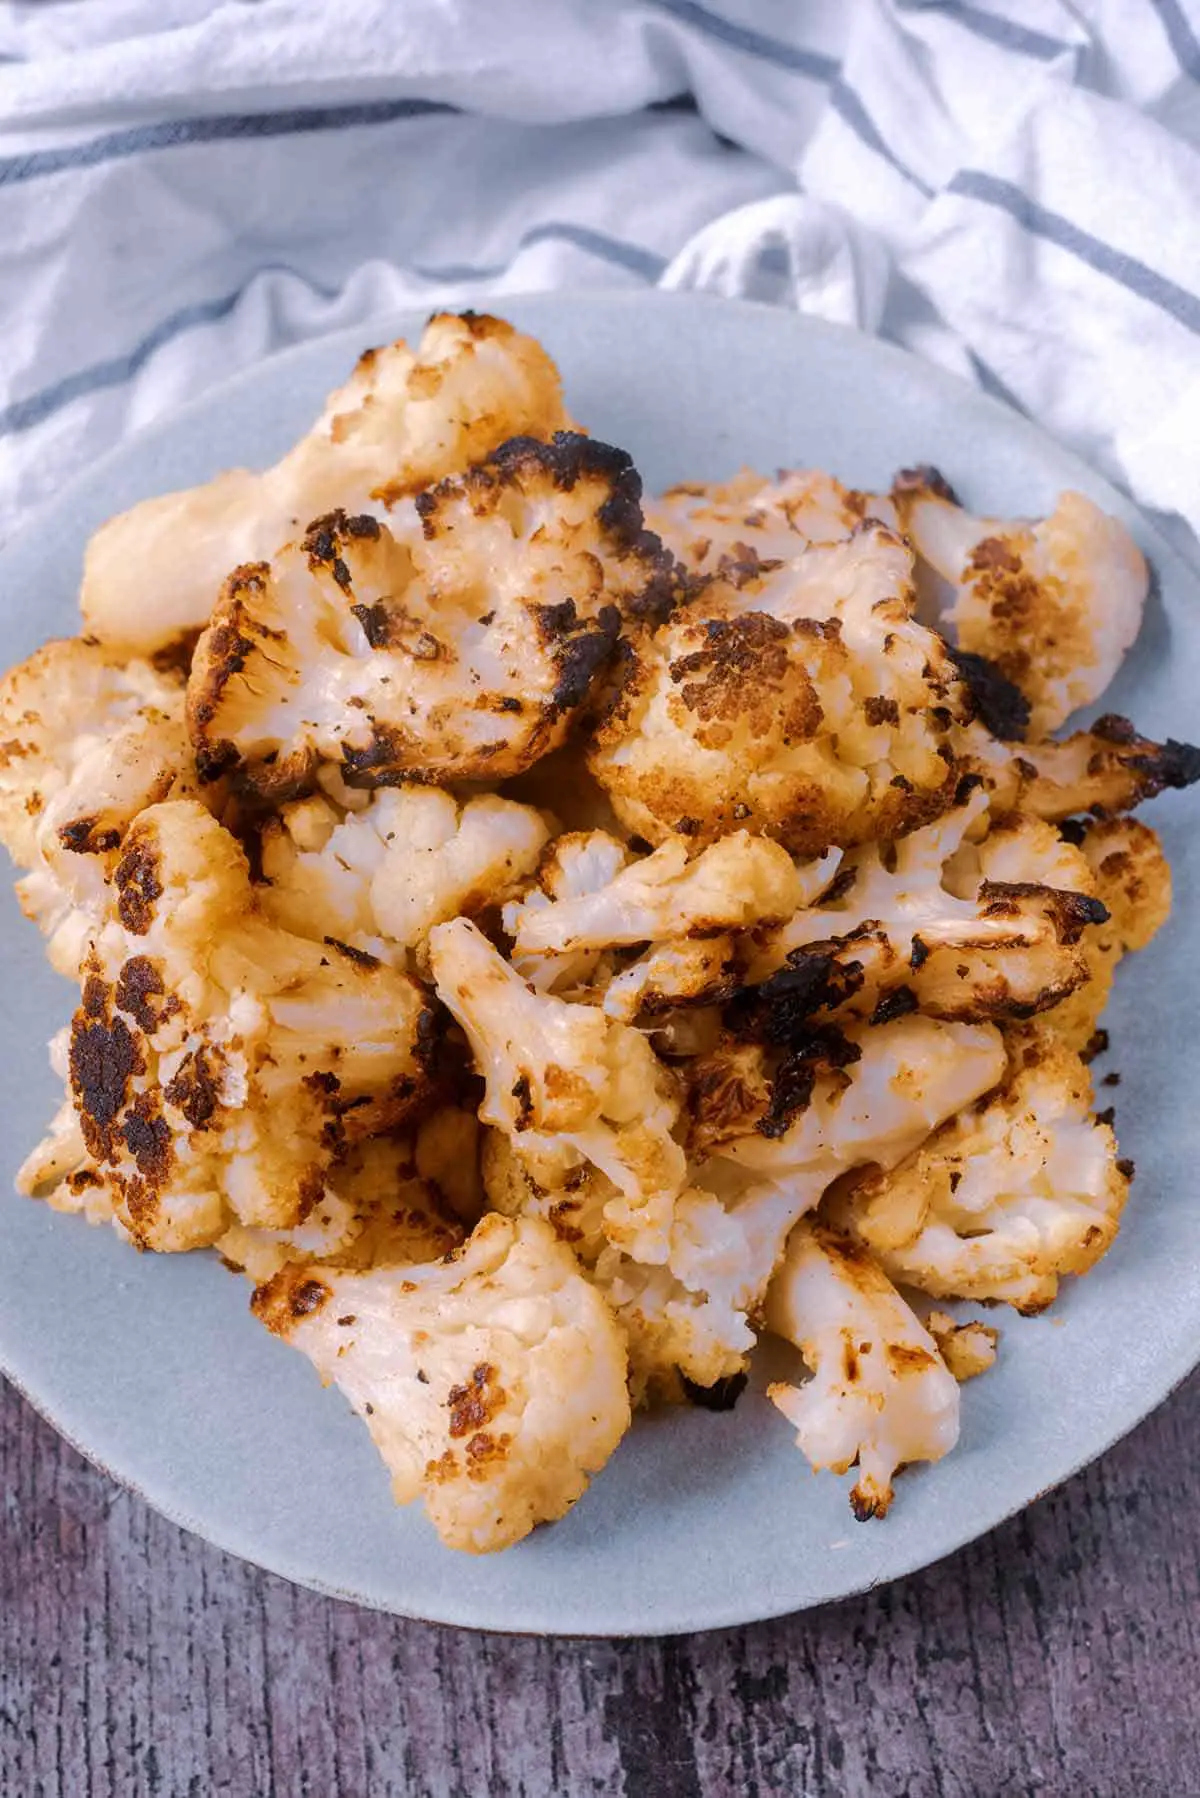 A plate of cooked cauliflower in front of a striped towel.